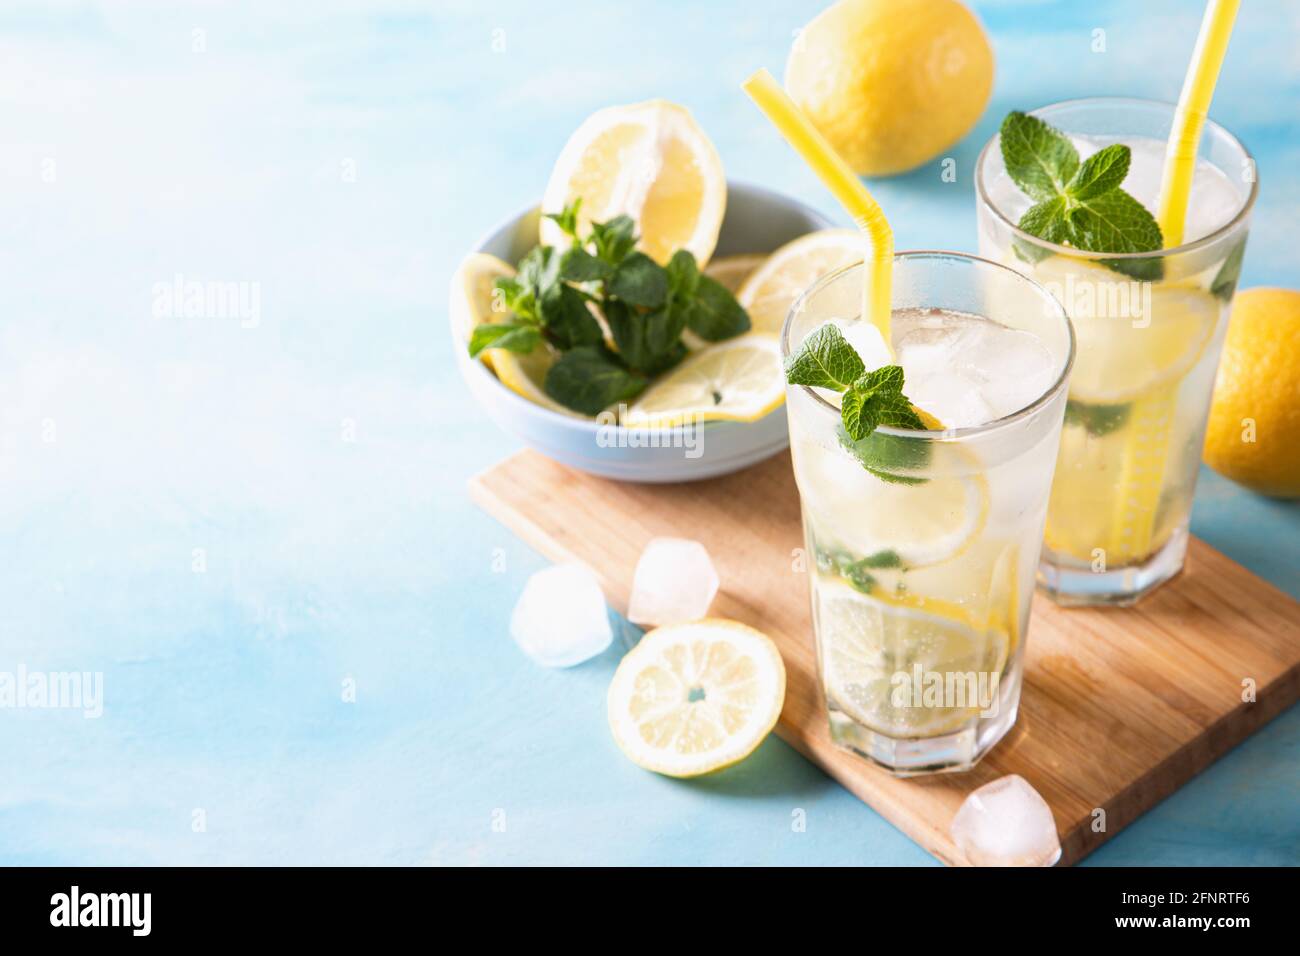 https://c8.alamy.com/comp/2FNRTF6/two-glass-with-lemonade-or-mojito-cocktail-with-lemon-and-mint-cold-refreshing-drink-or-beverage-with-ice-on-blue-background-copy-space-2FNRTF6.jpg